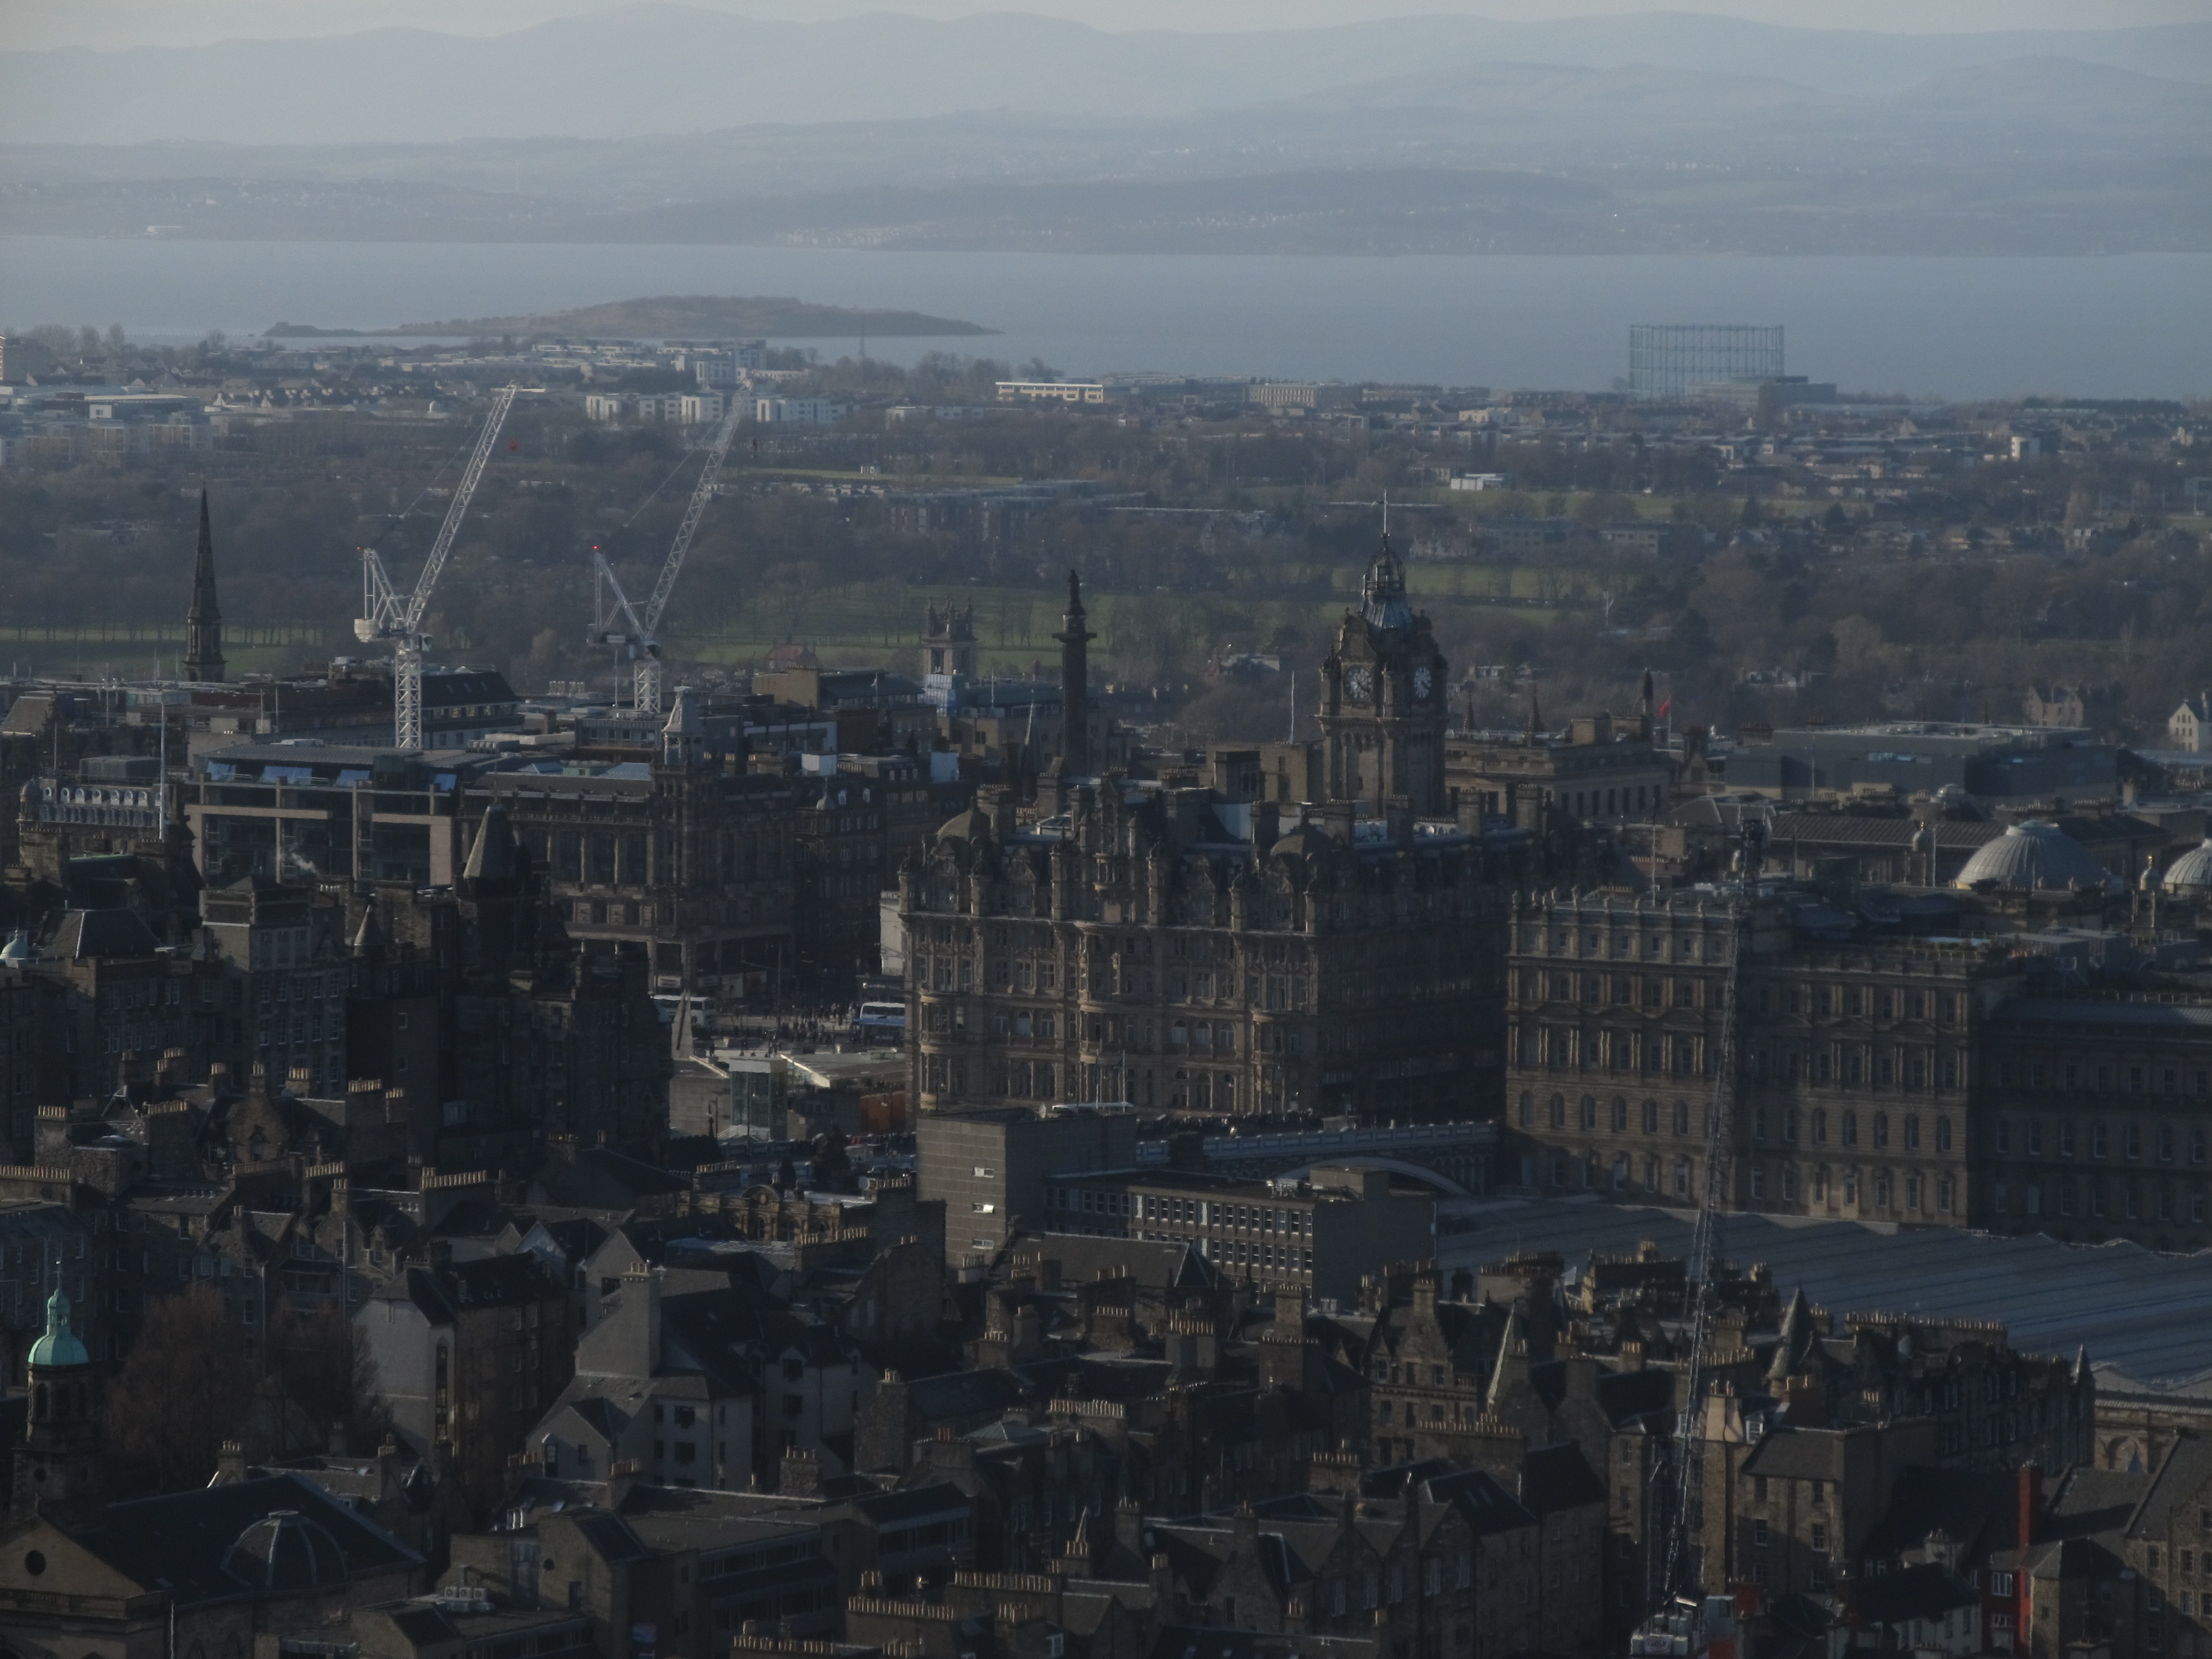 The Edinburgh Old Town with Barmoral Hotel seen from the Arthur's seat